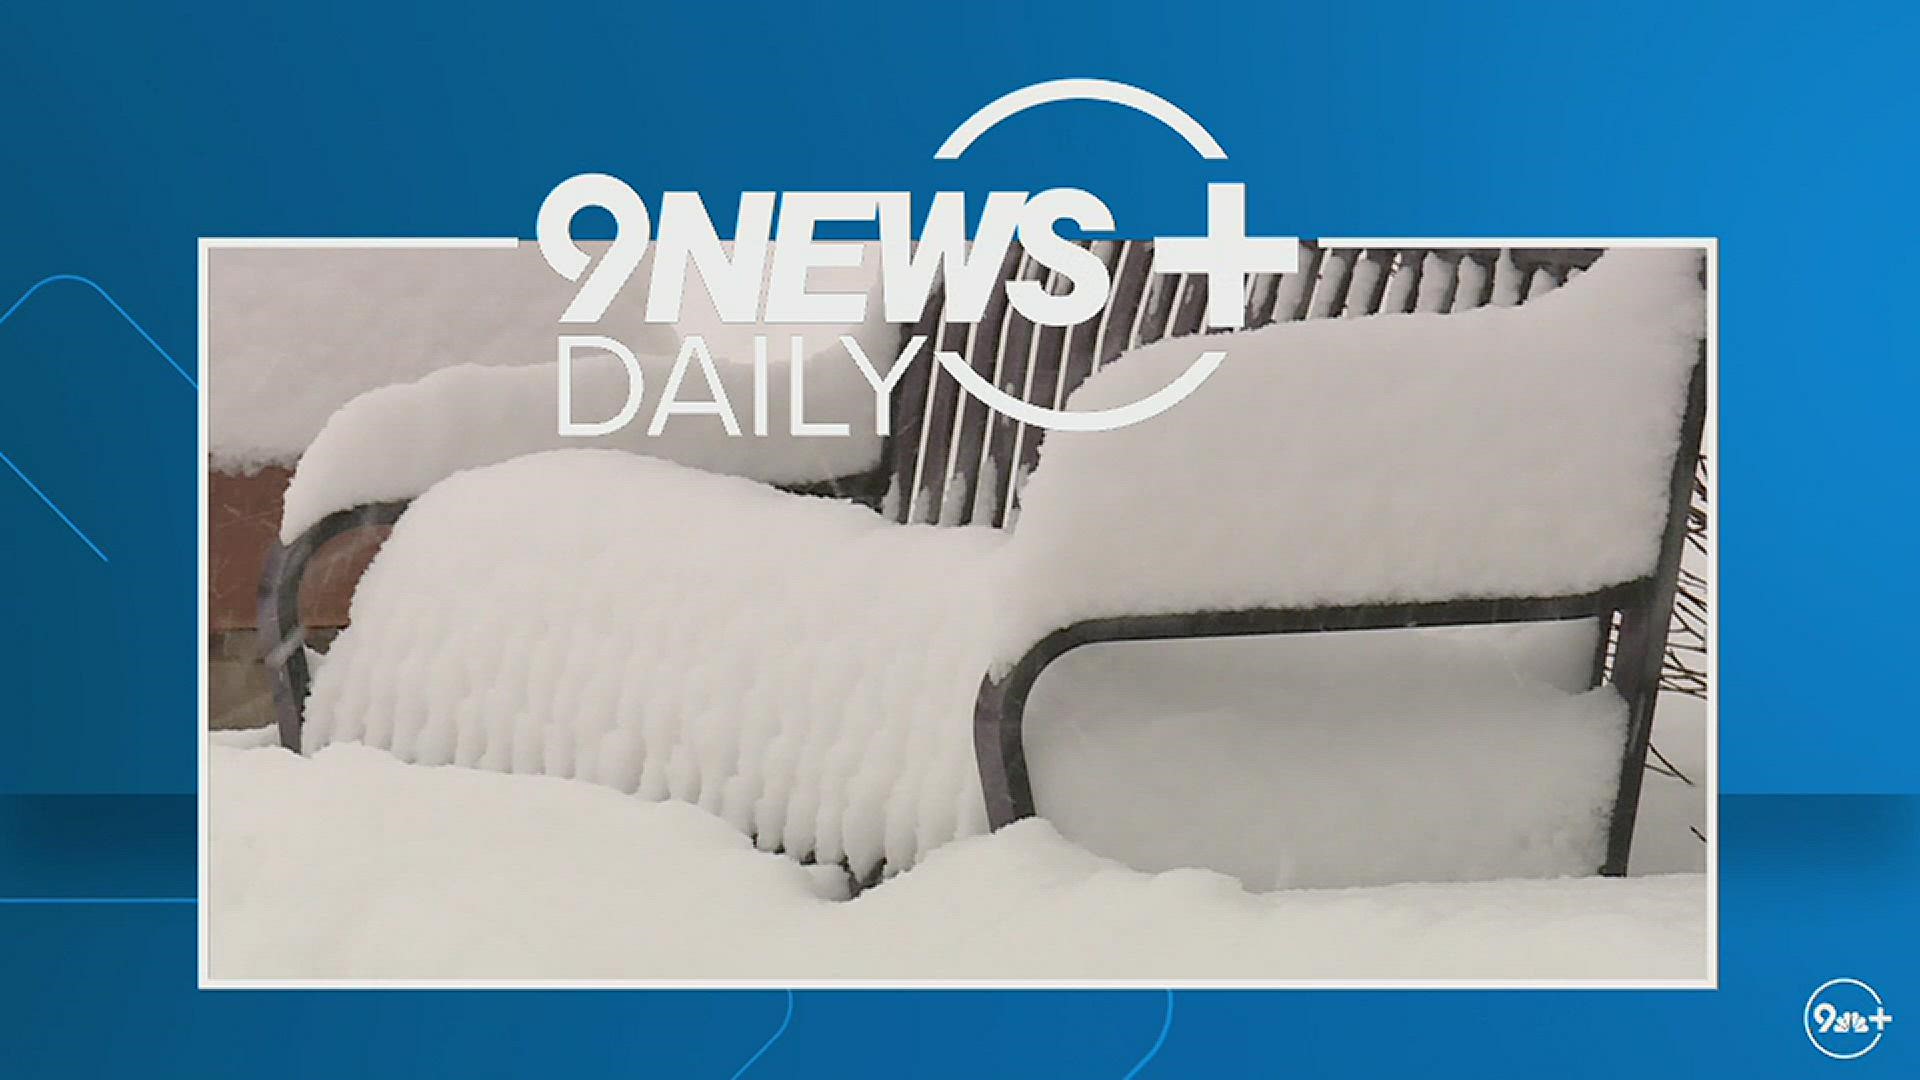 Meteorologist Chris Bianchi explains why on average, March is the snowiest month along the front range.